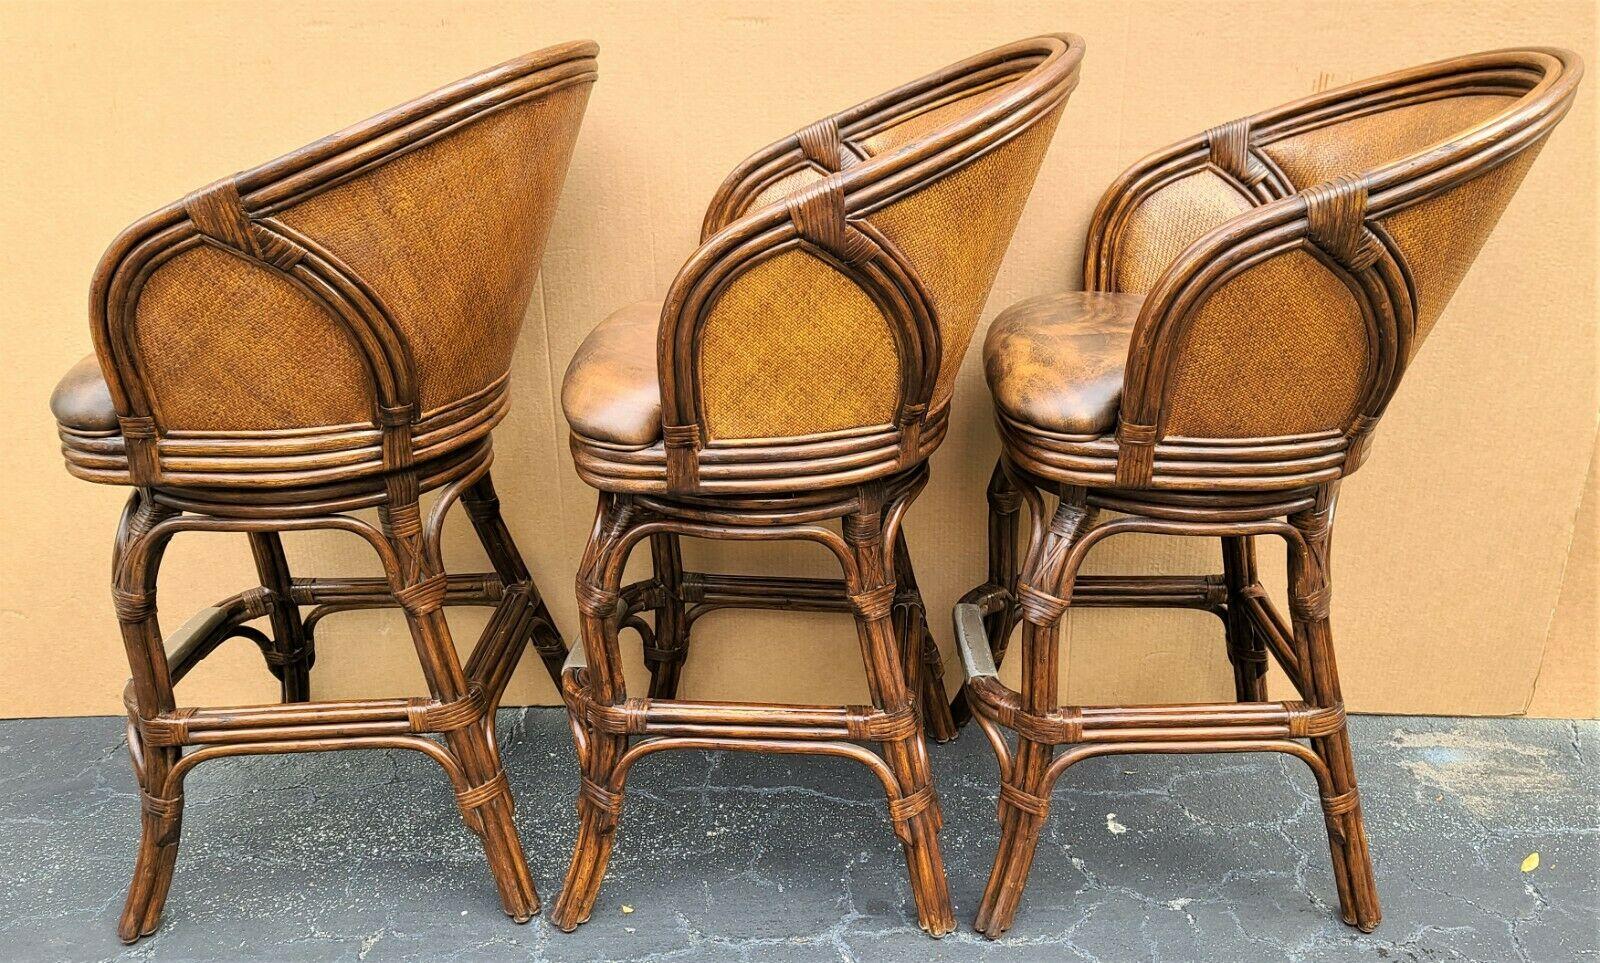 Offering one of our recent Palm Beach Estate Fine Furniture acquisitions of a
Set of 3 Hooker bamboo rattan wicker leather swivel barstools

Approximate measurements in inches
43.5